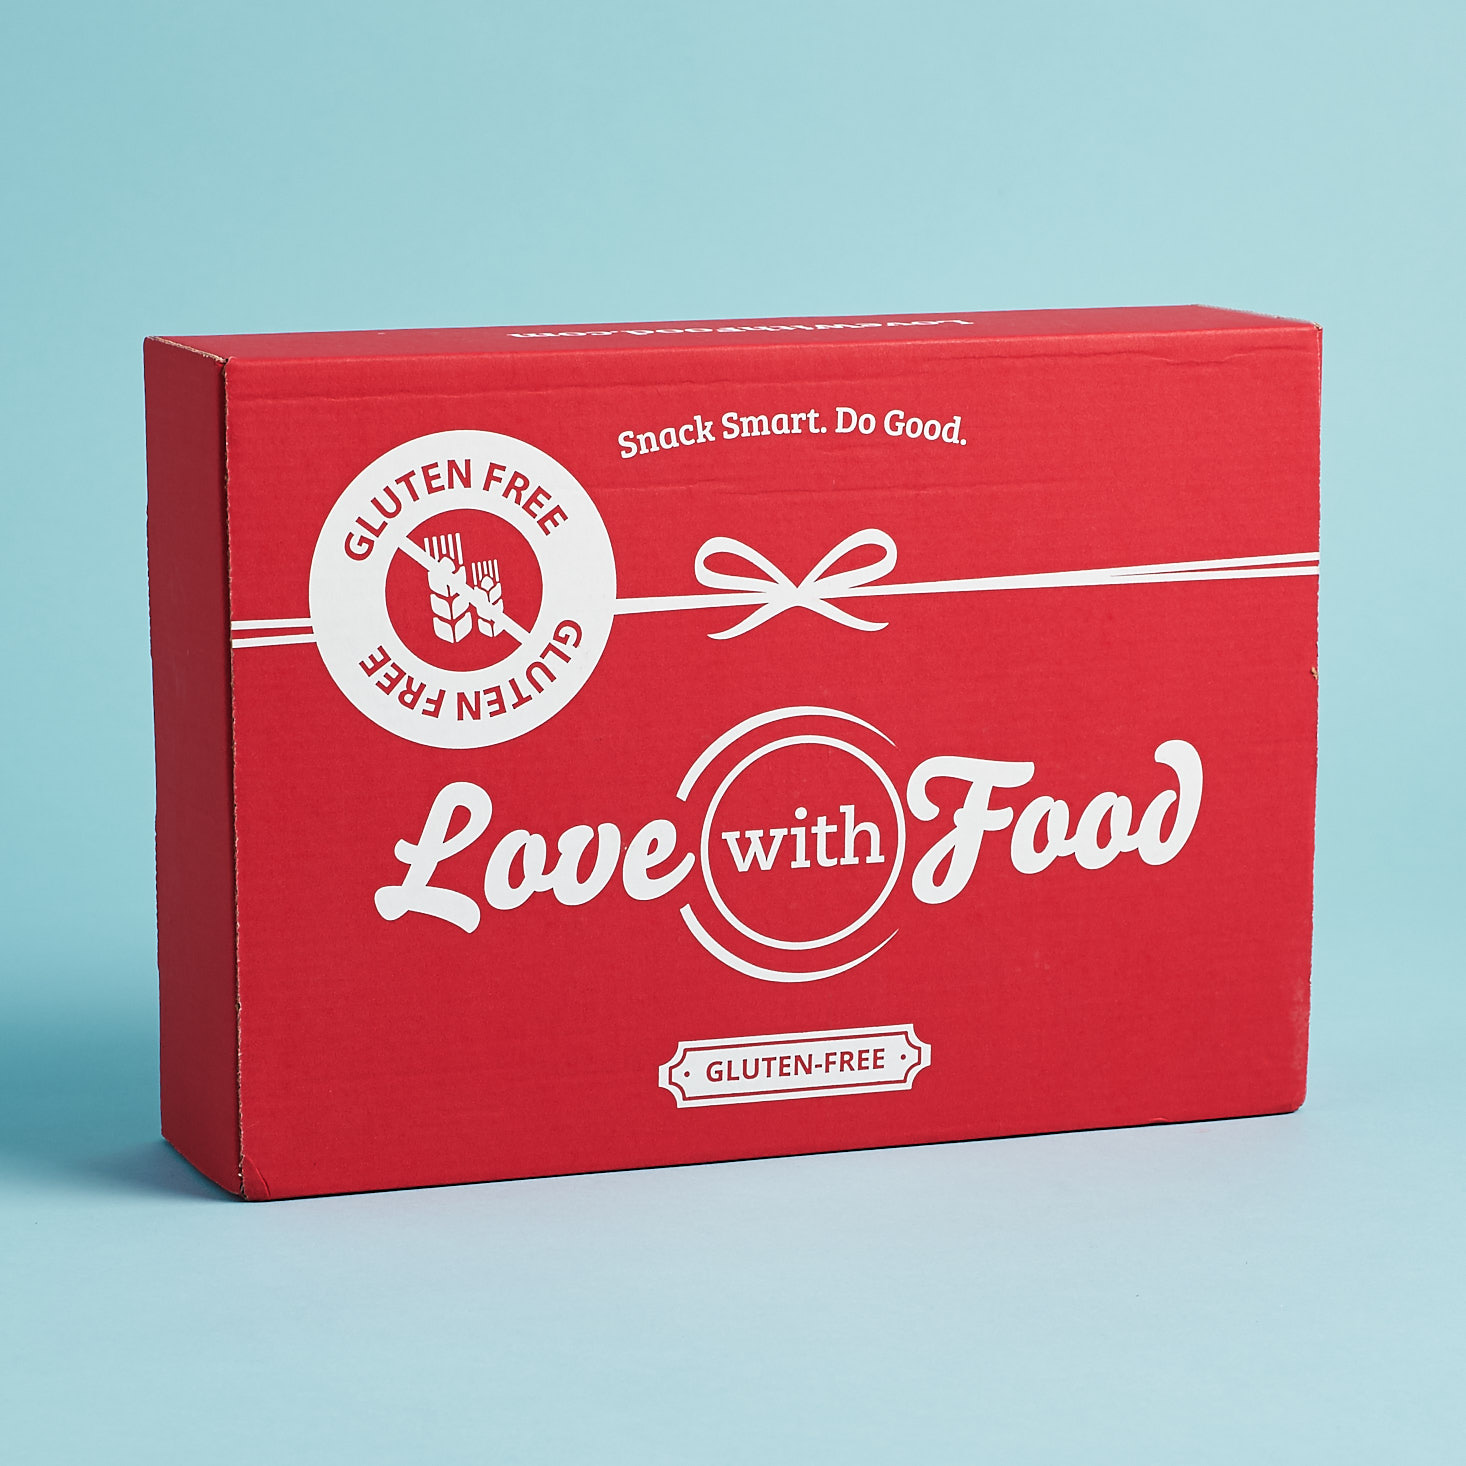 Love with Food Gluten Free Box Review + Coupon – August 2018